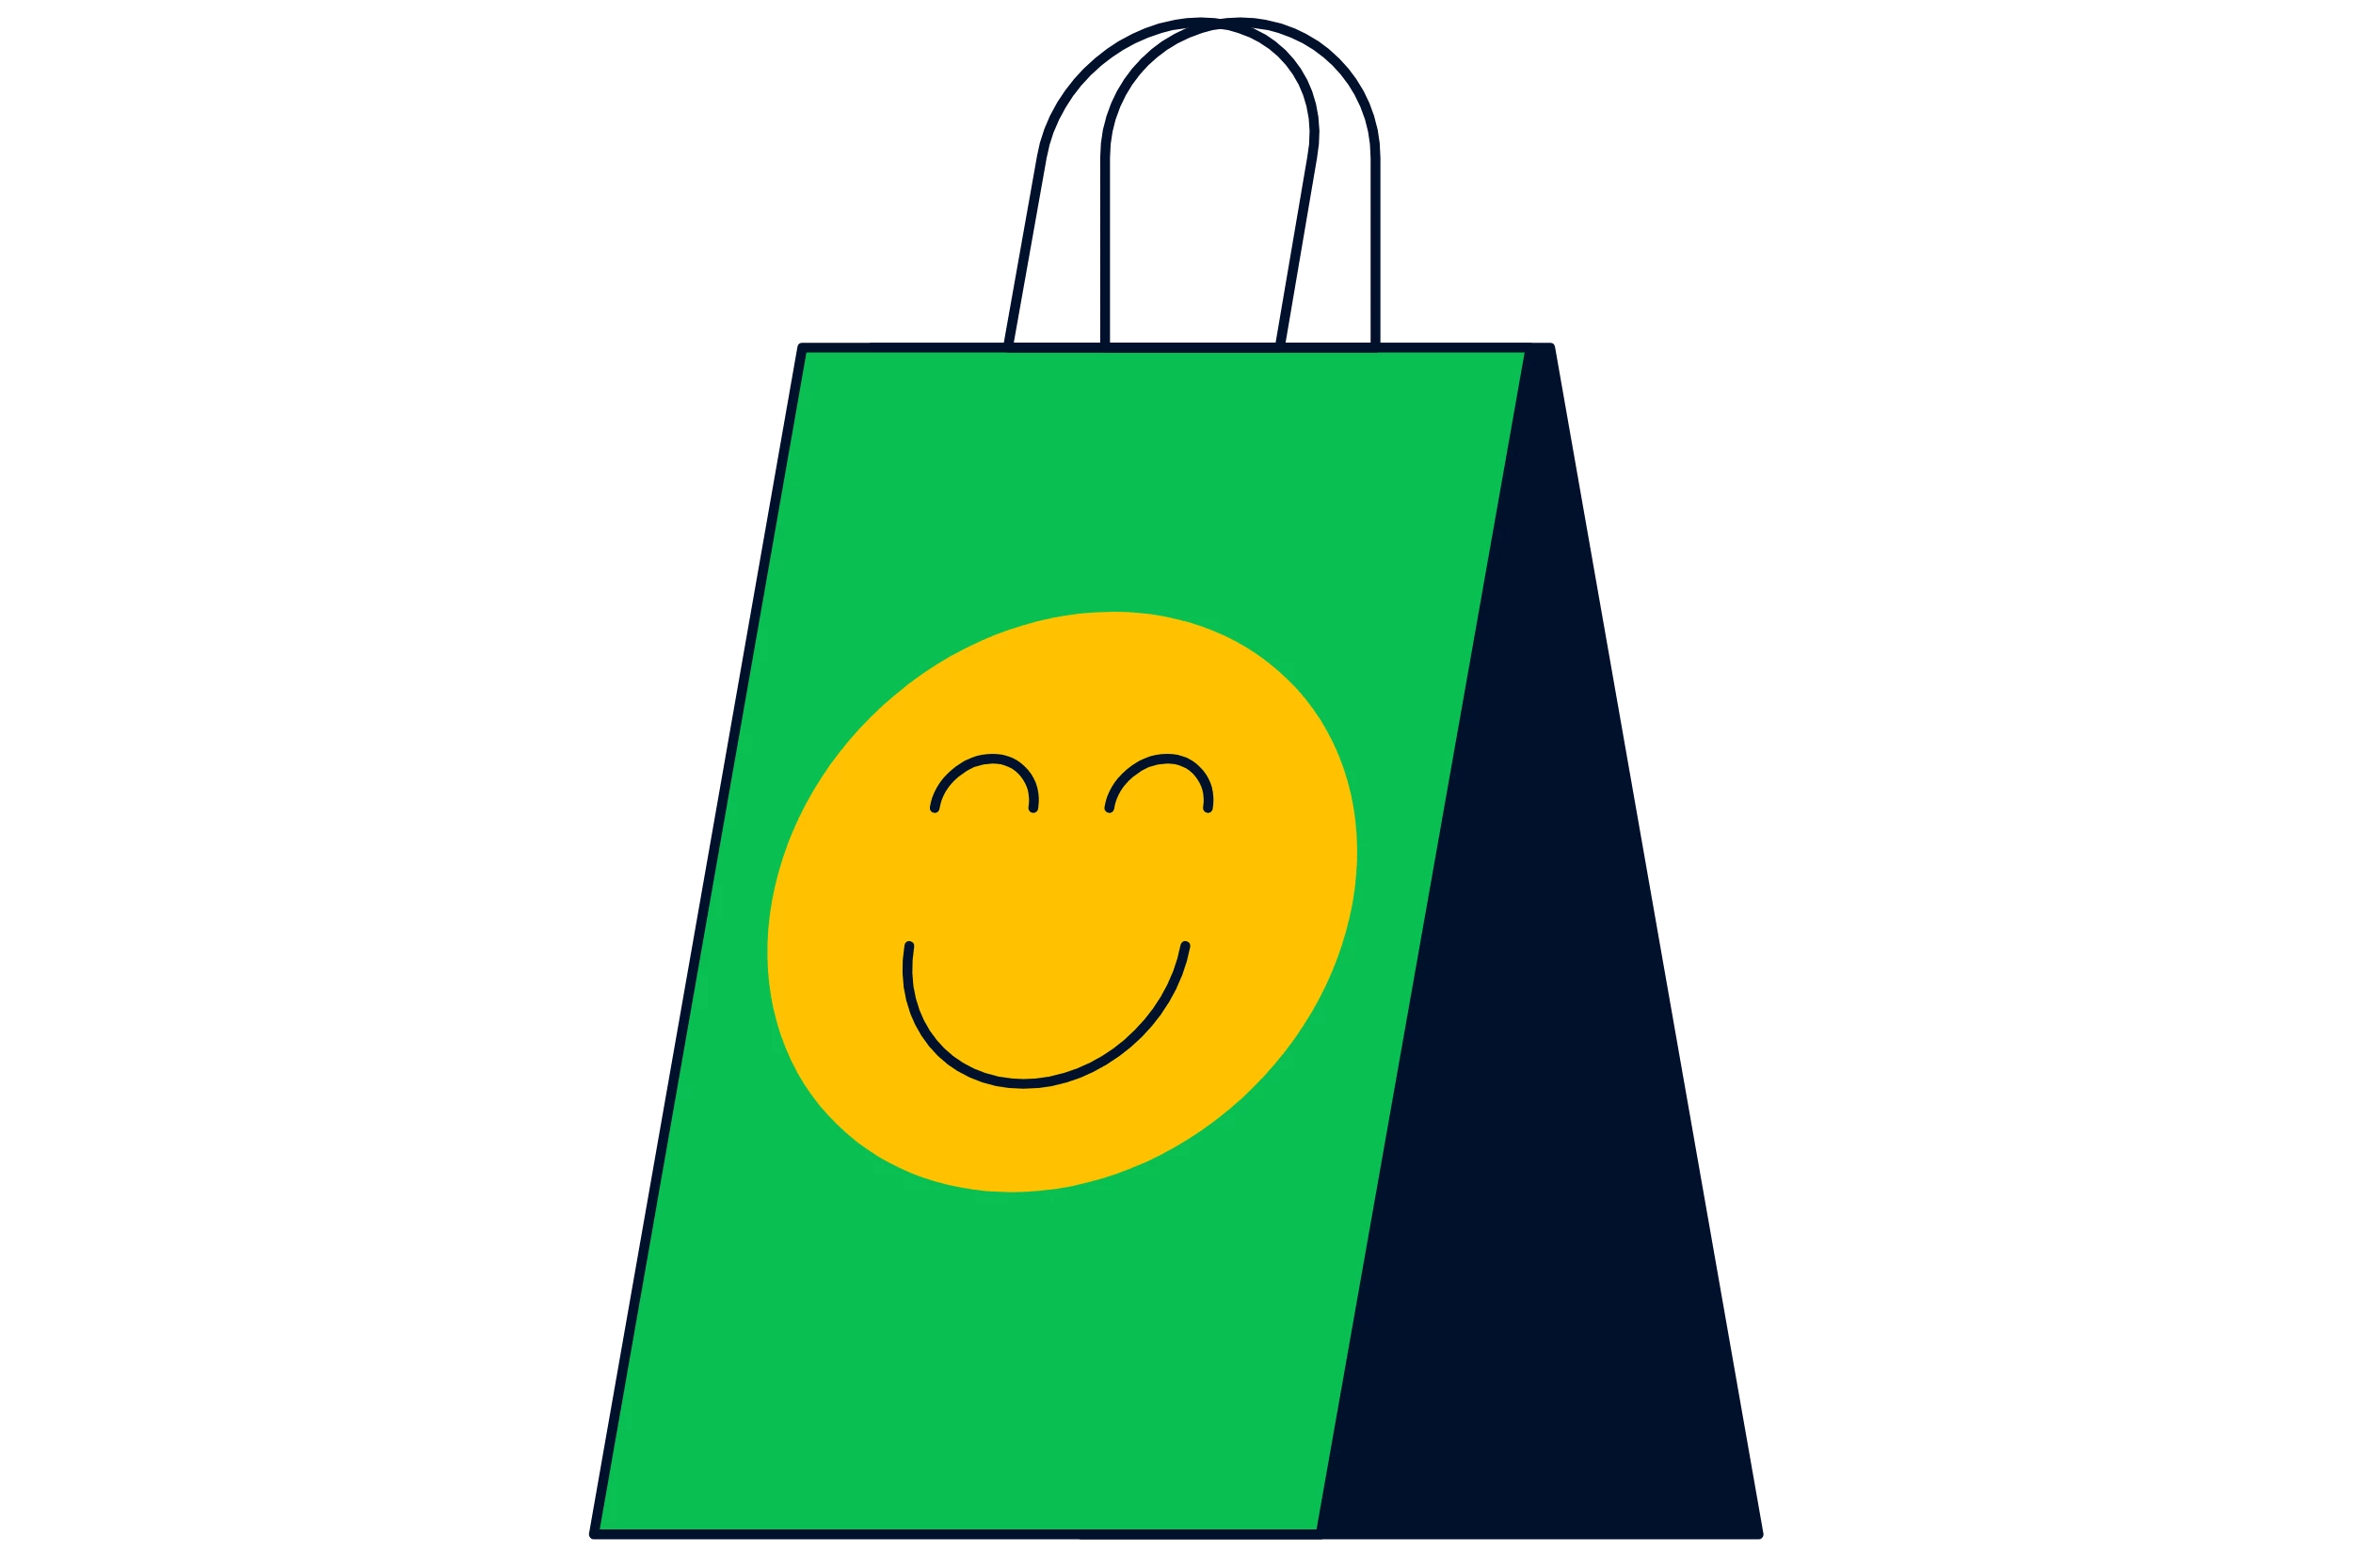 A yellow smiley face on top of a green shopping bag.